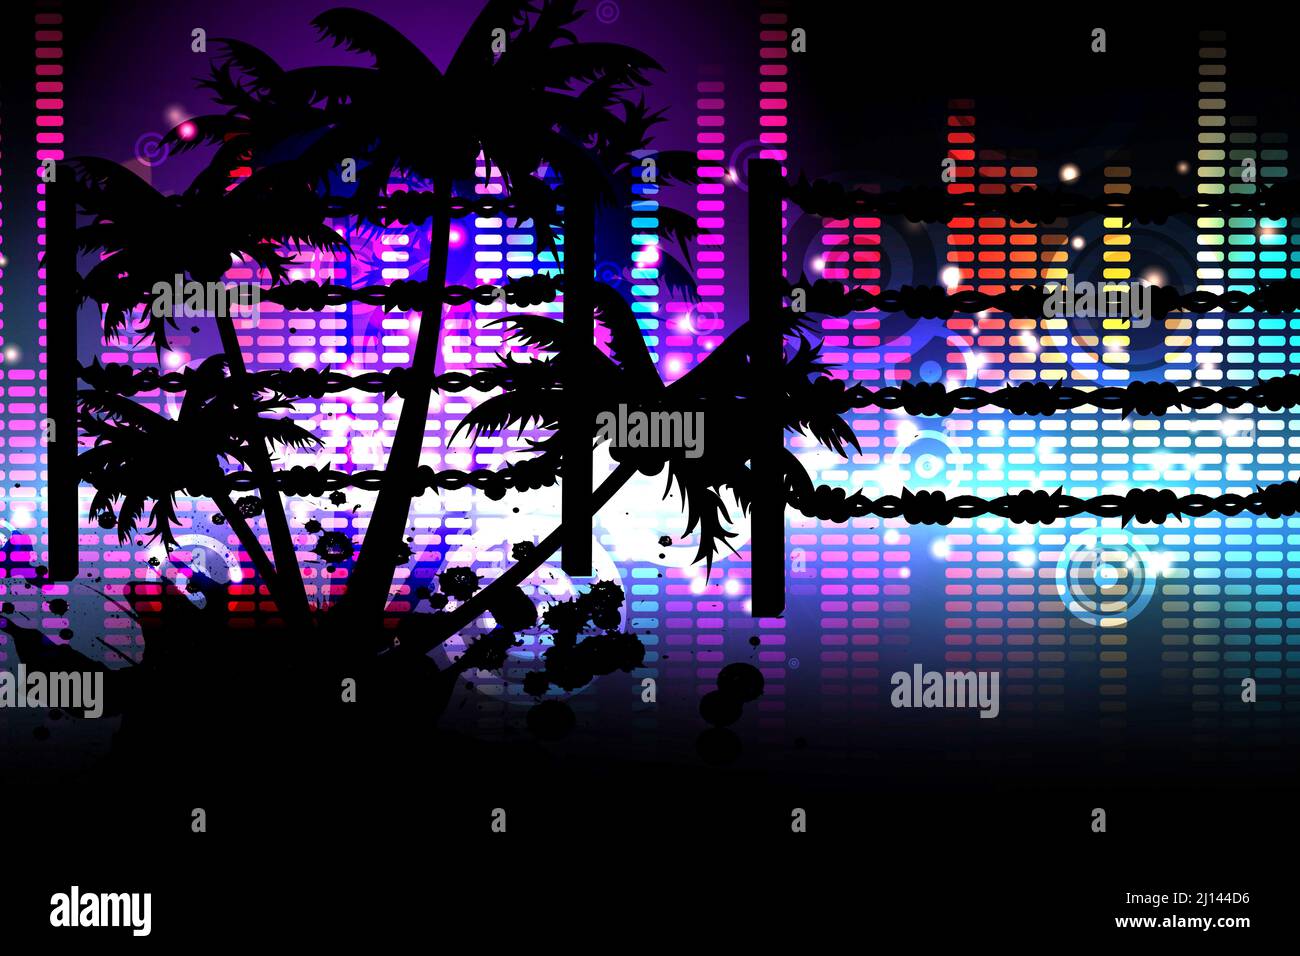 Barbed wire over silhouette of palm trees, music equalizer against black background Stock Photo